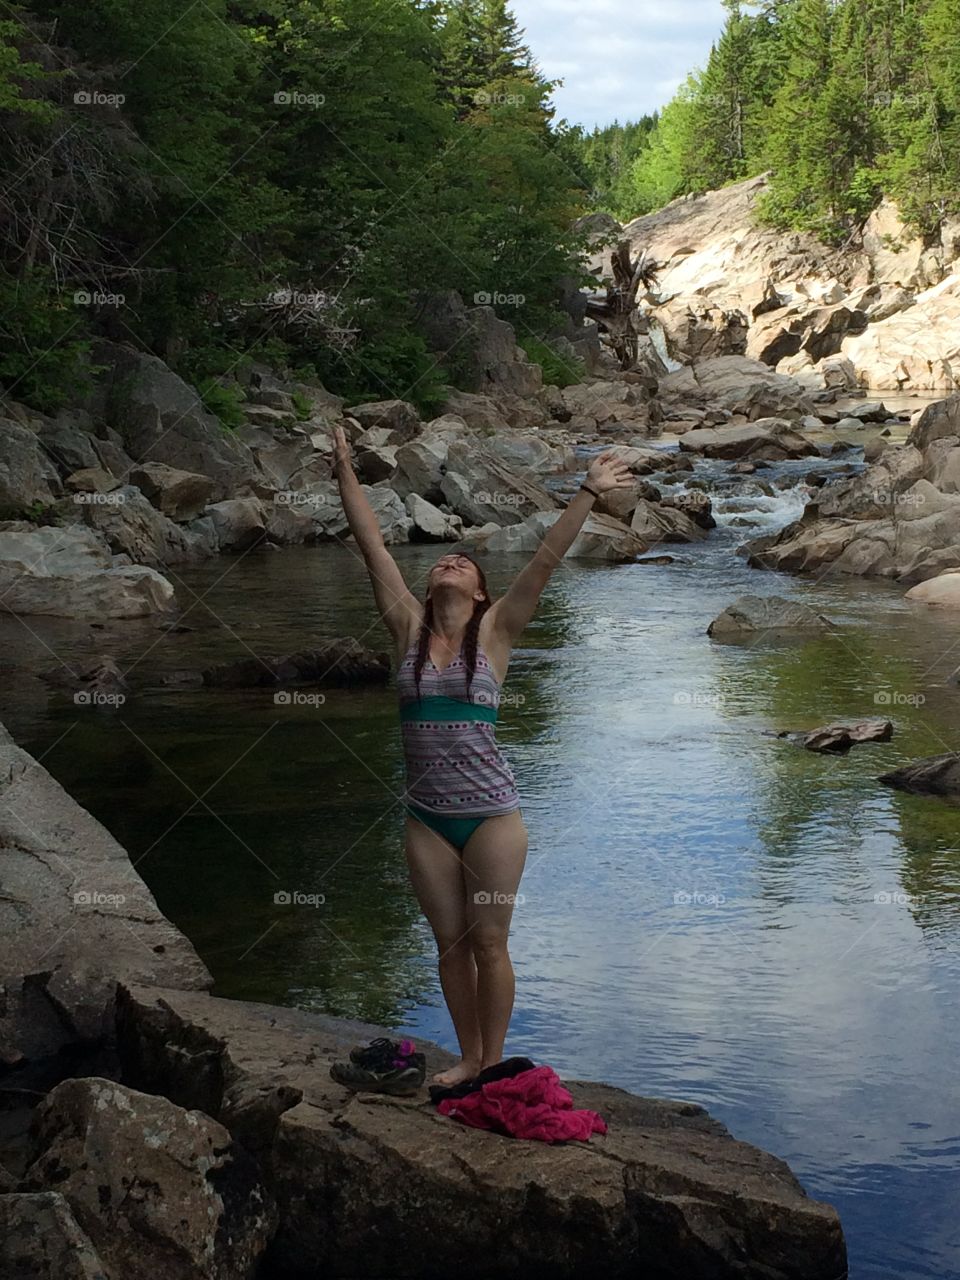 Celebrating life after a cool swim and a hike.